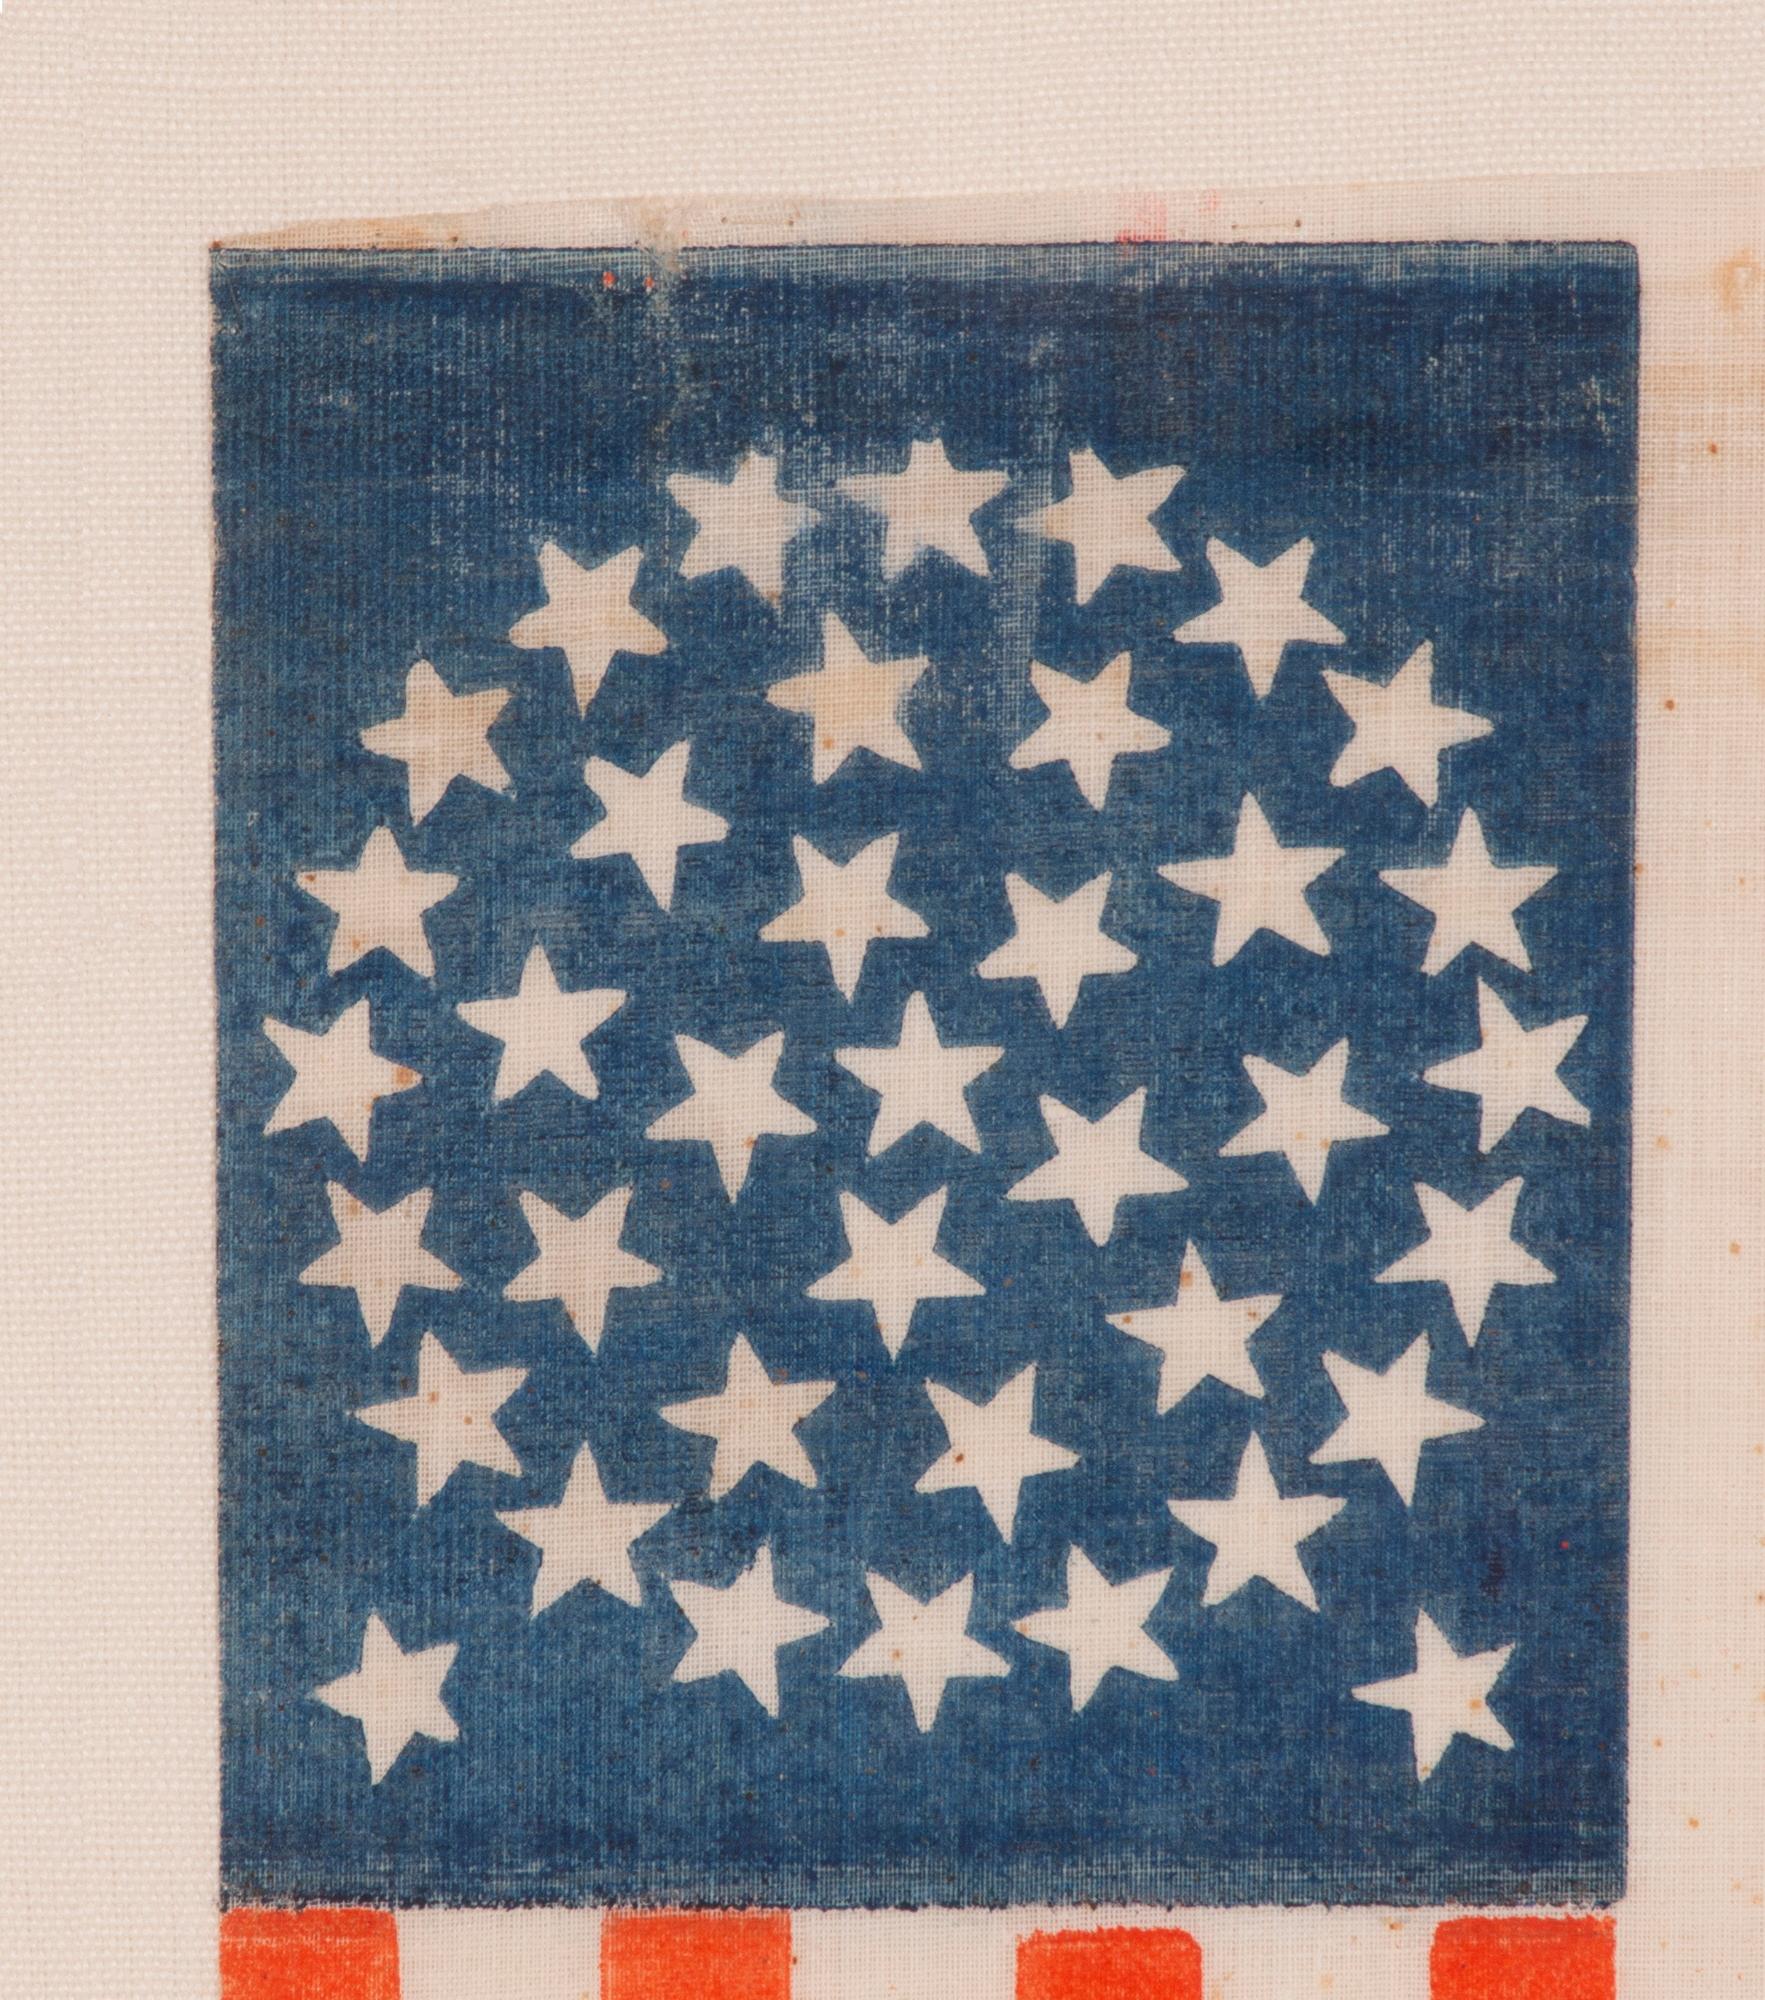 38 STARS IN A MEDALLION CONFIGURATION WITH 2 OUTLIERS, ON AN ANTIQUE AMERICAN FLAG WITH VIBRANT COLORATION, REFLECTS COLORADO STATEHOOD, 1876-1889, ILLUSTRATED IN “THE STARS & STRIPES: FABRIC OF THE AMERICAN SPIRIT” by RICHARD PIERCE, 2005

38 star